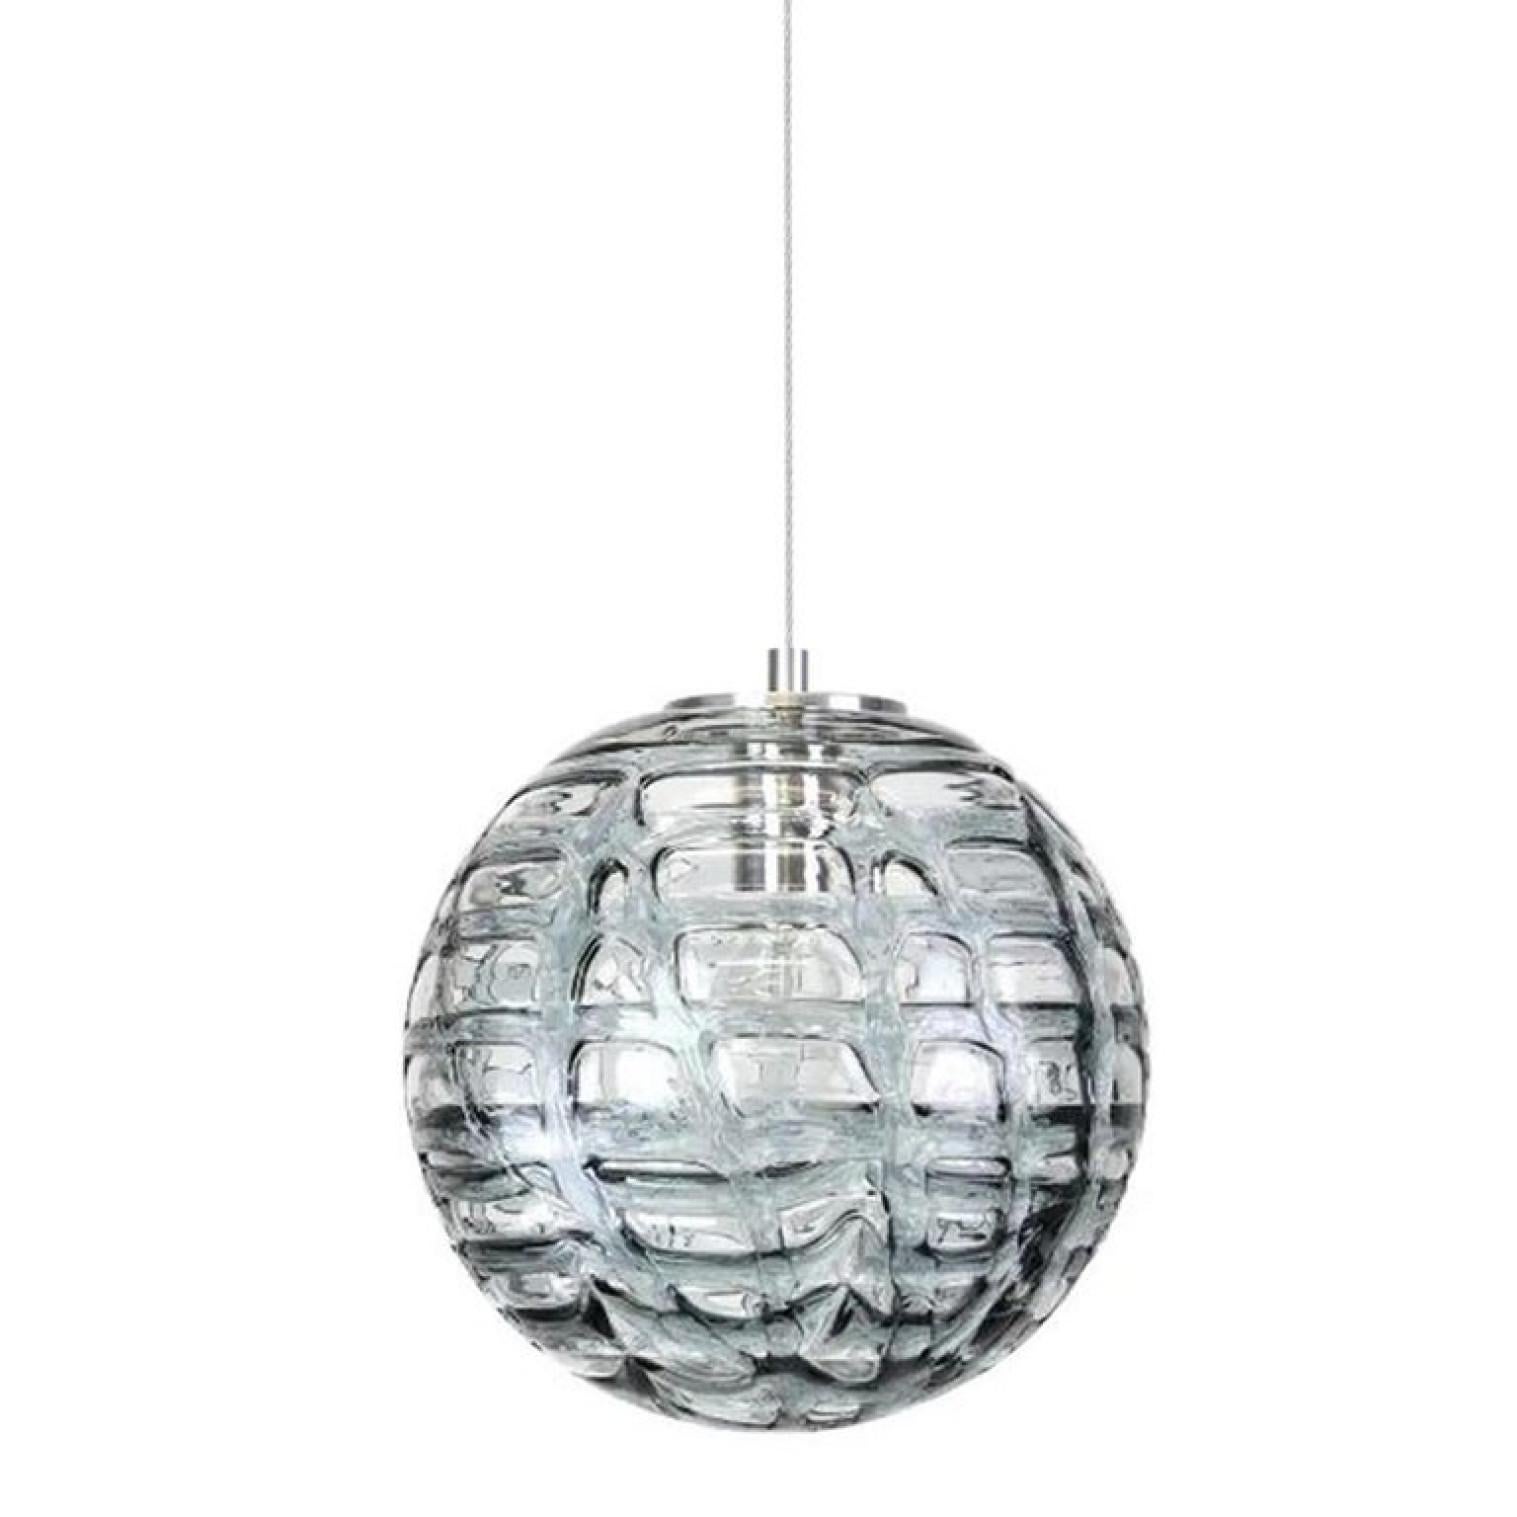 Exceptional Set of 3 Murano Glass Pendant Lights Venini Style, 1960s In Excellent Condition For Sale In Rijssen, NL